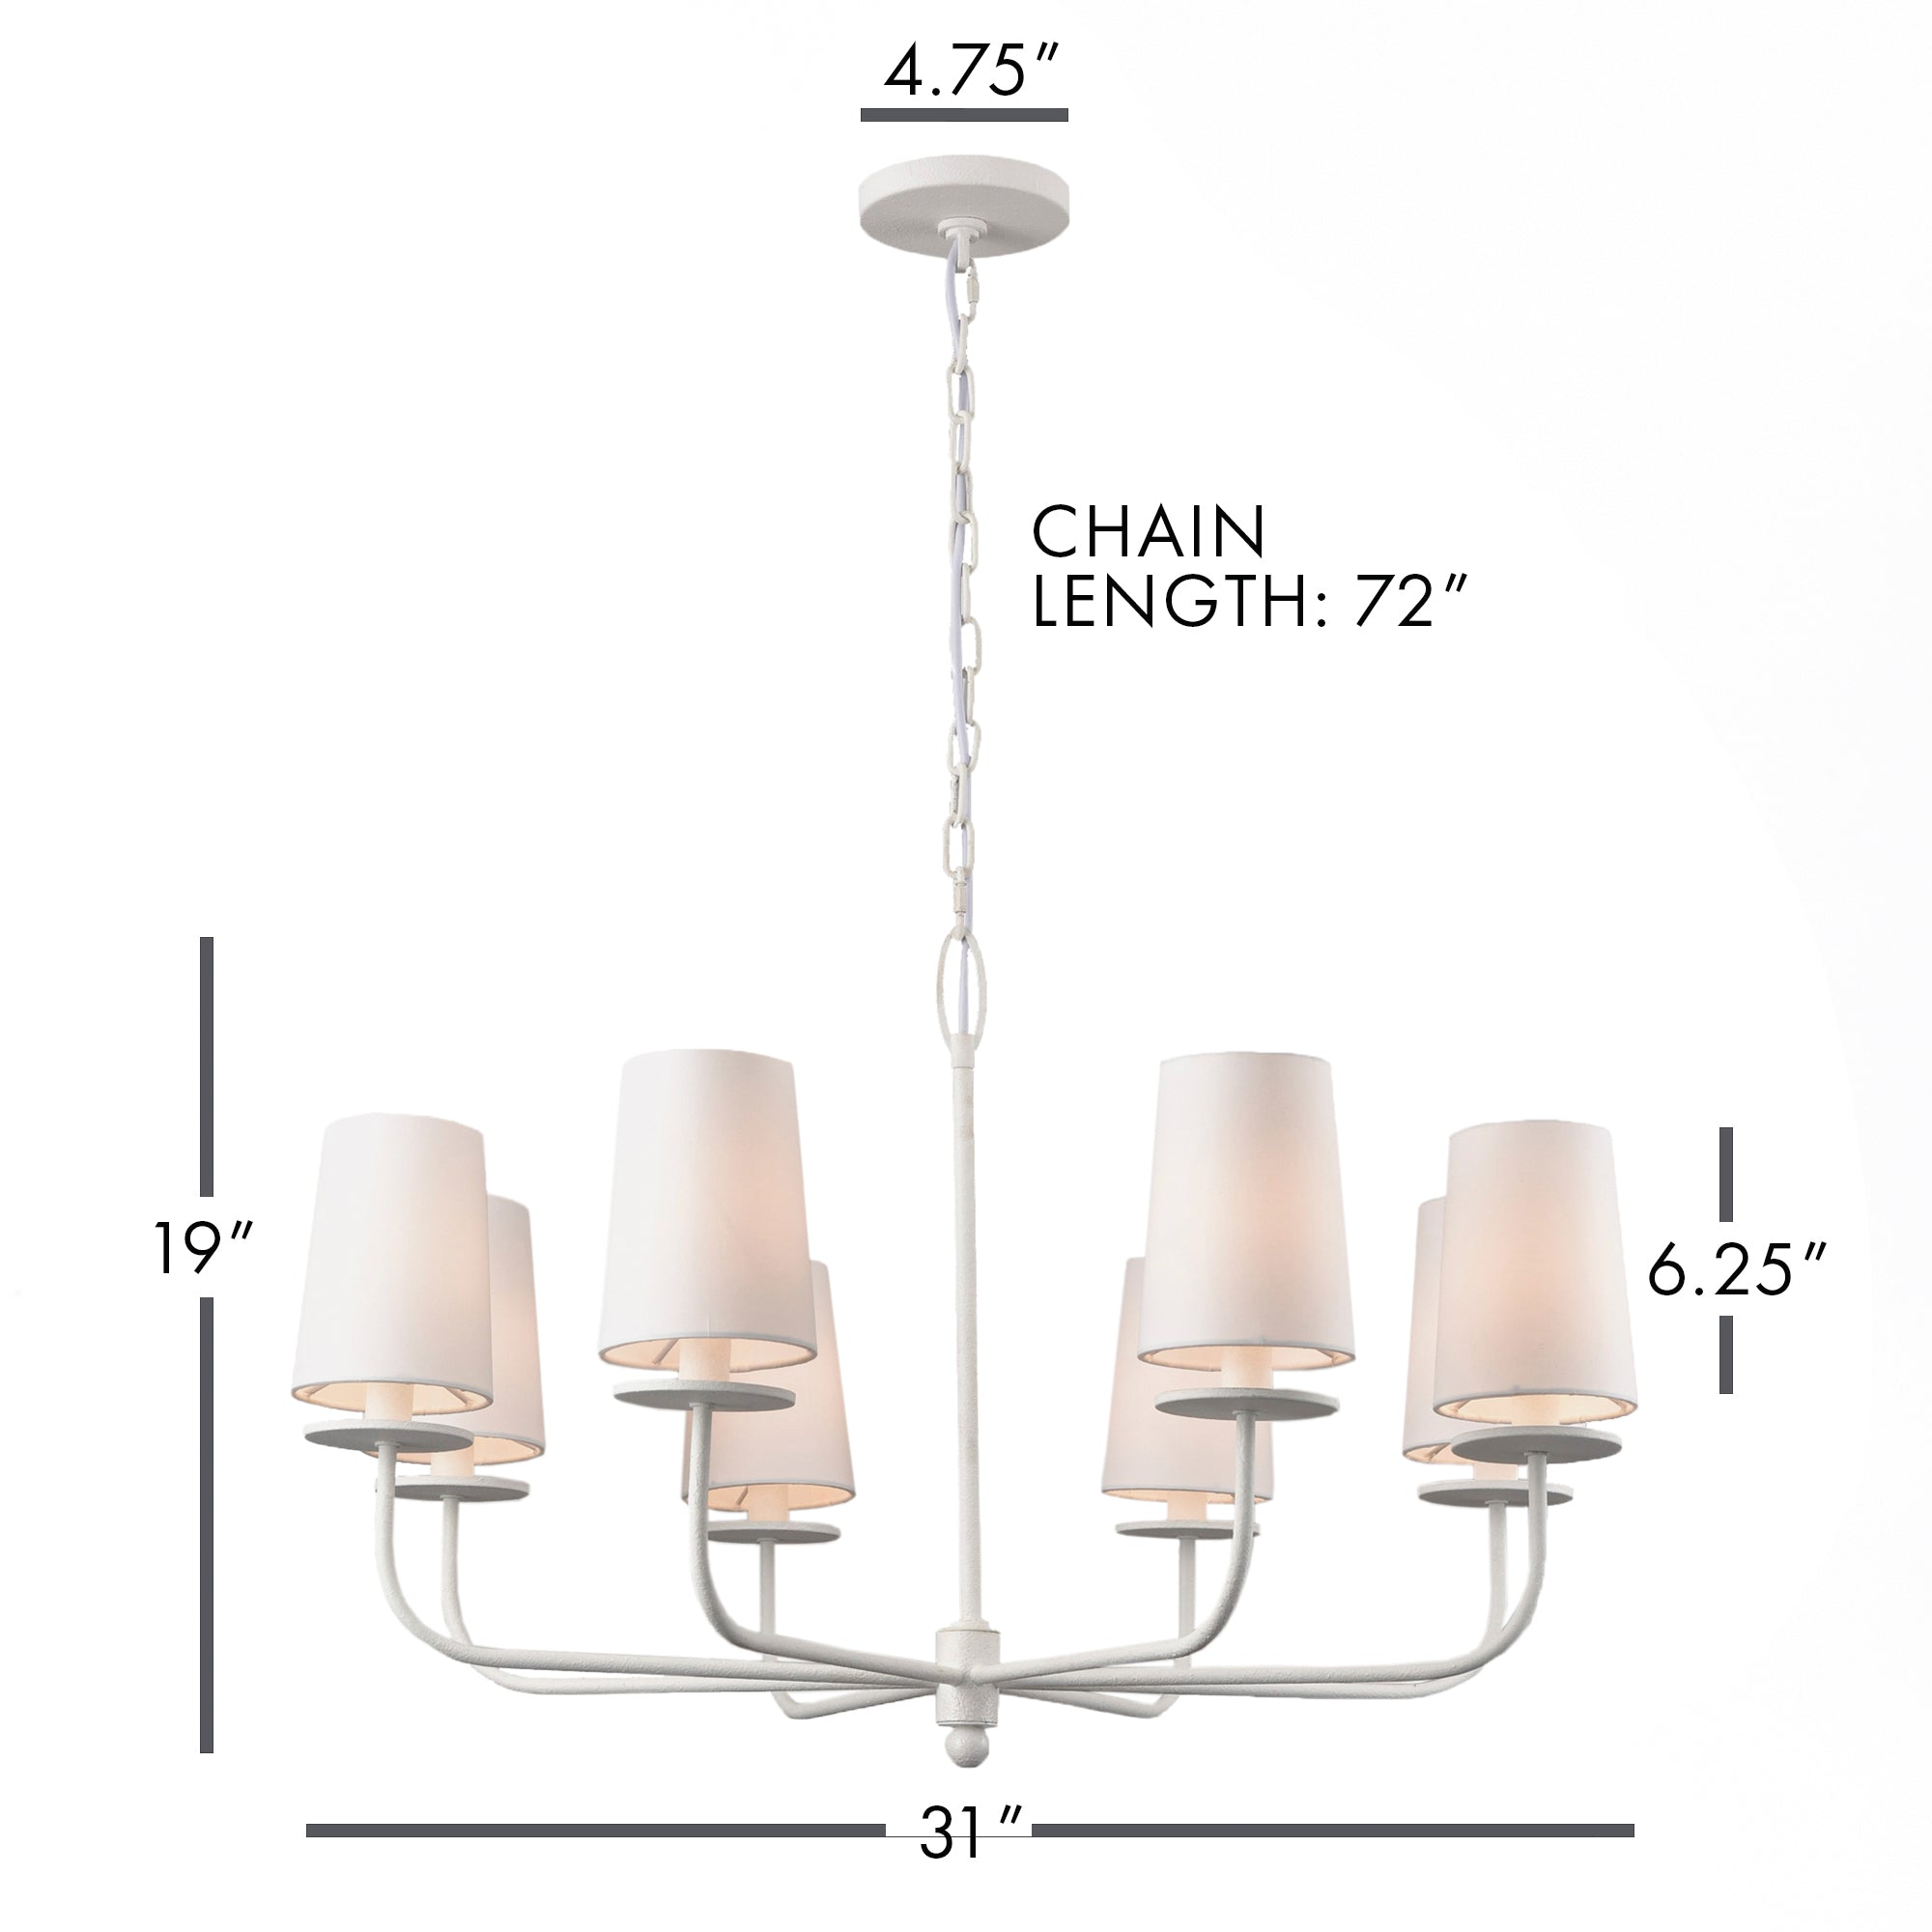 The Neville Chandelier is a fresh take on a classic shape. Subtle modern touches like the tapered shade and matte white finish complete the look. Amethyst Home provides interior design, new construction, custom furniture, and area rugs in the Seattle metro area.